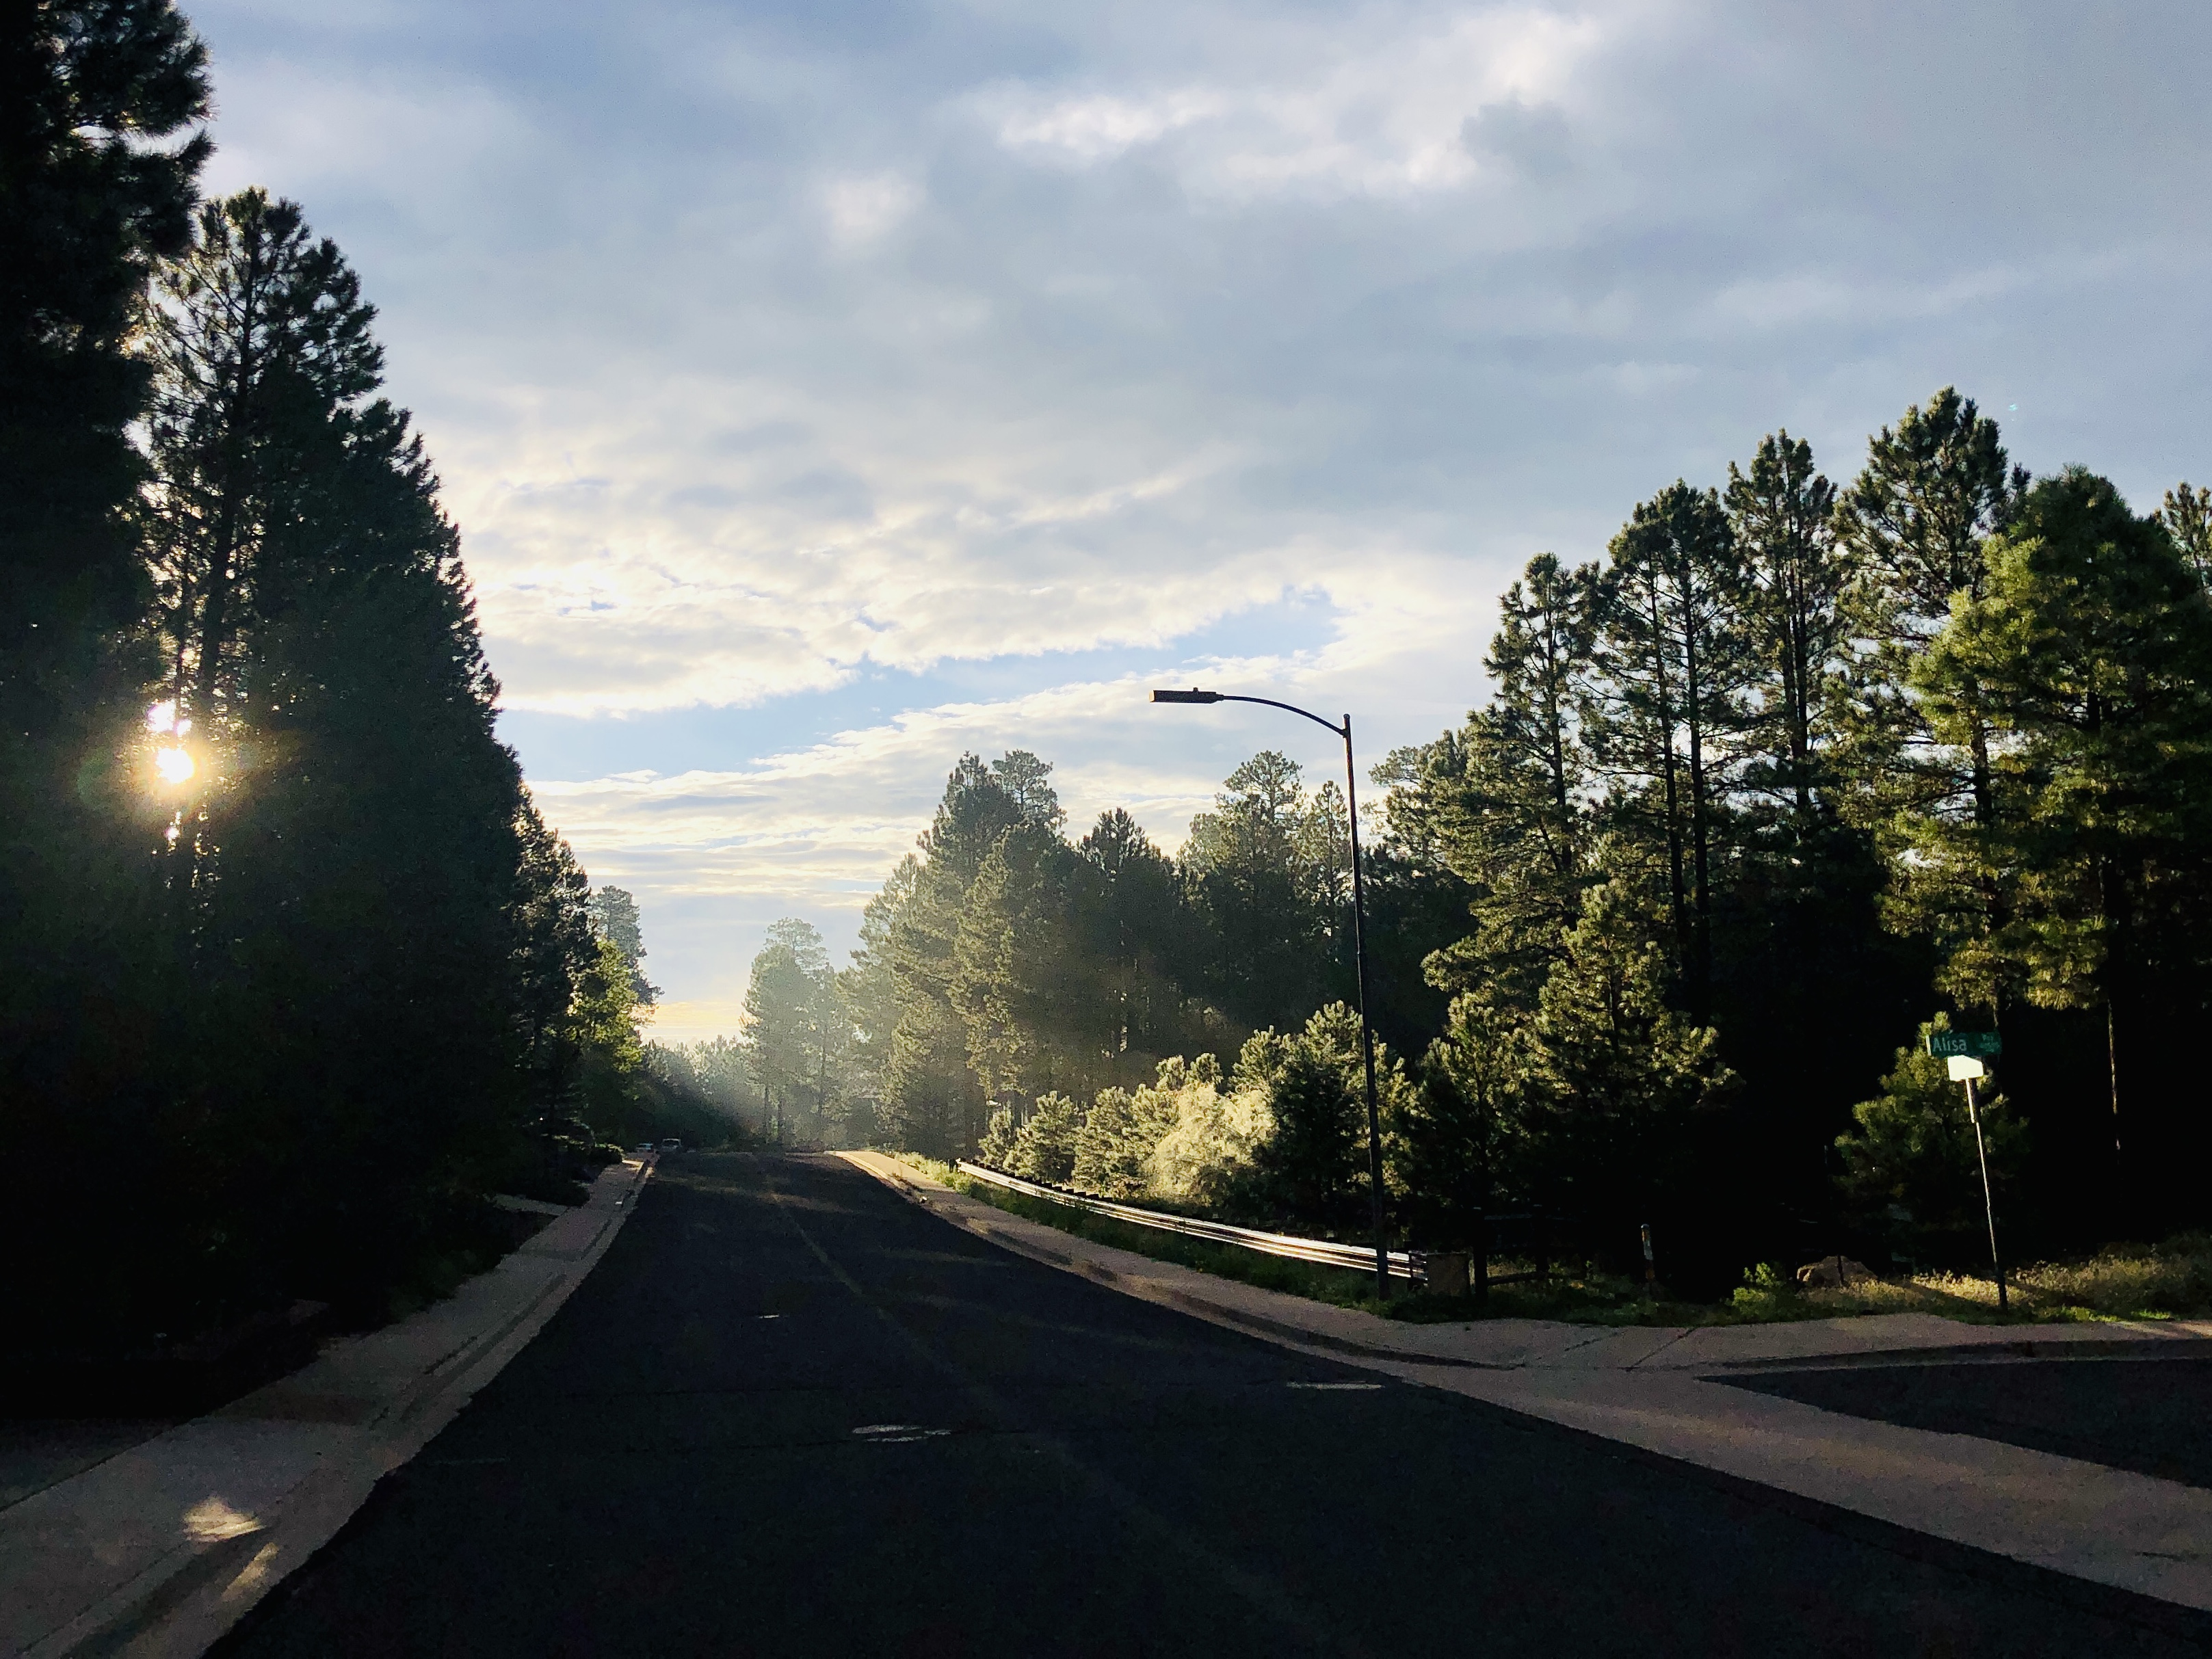 Low sunlight filters through trees and hazy clouds, making a misty glowing effect on the street 